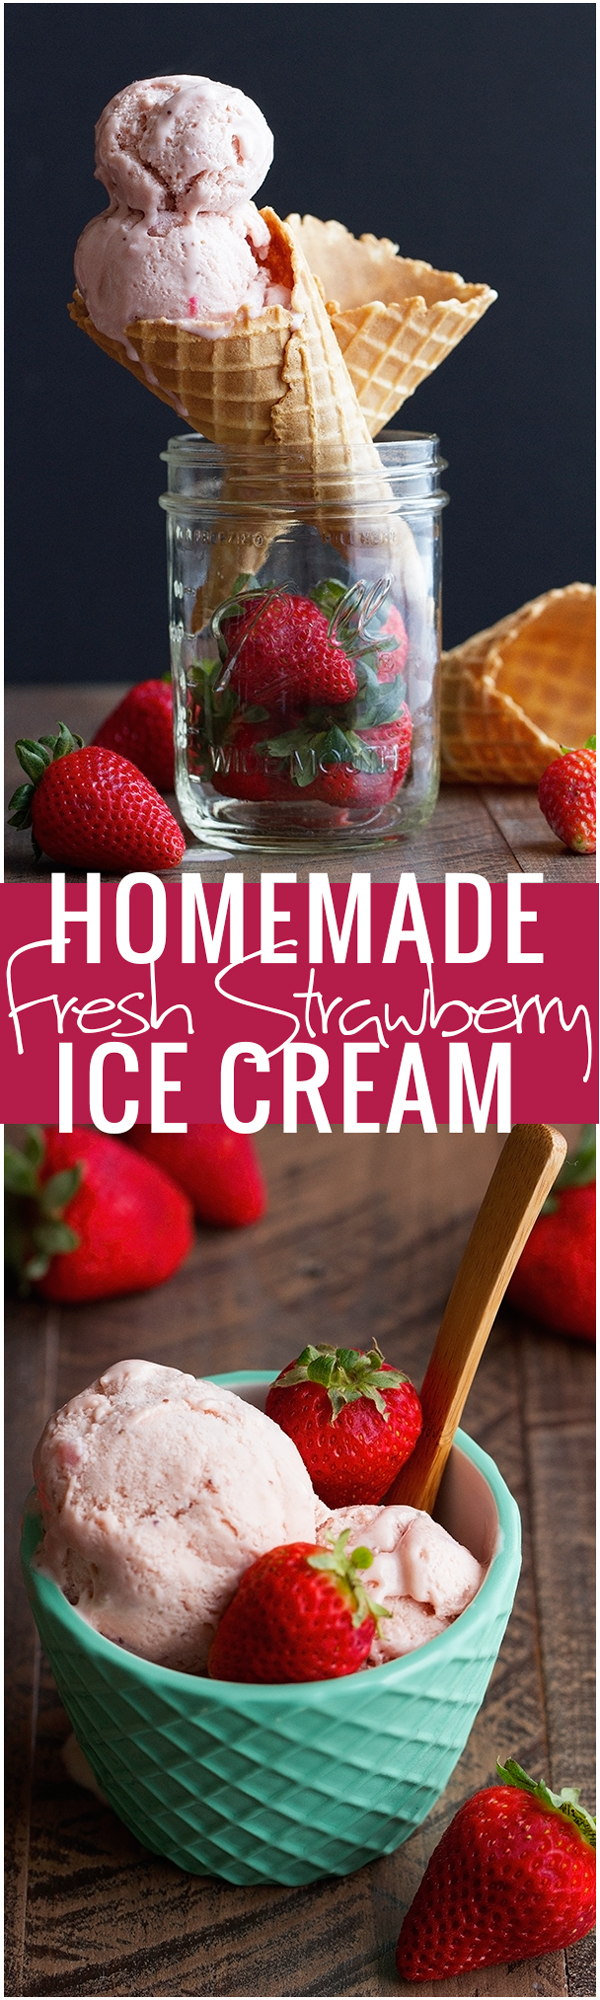 Fresh Strawberry Berry Ice cream that's easy to make at home and actually contains an ENTIRE pound of strawberries! #strawberries #strawberryicecream #icecream #gelato | Littlespicejar.com